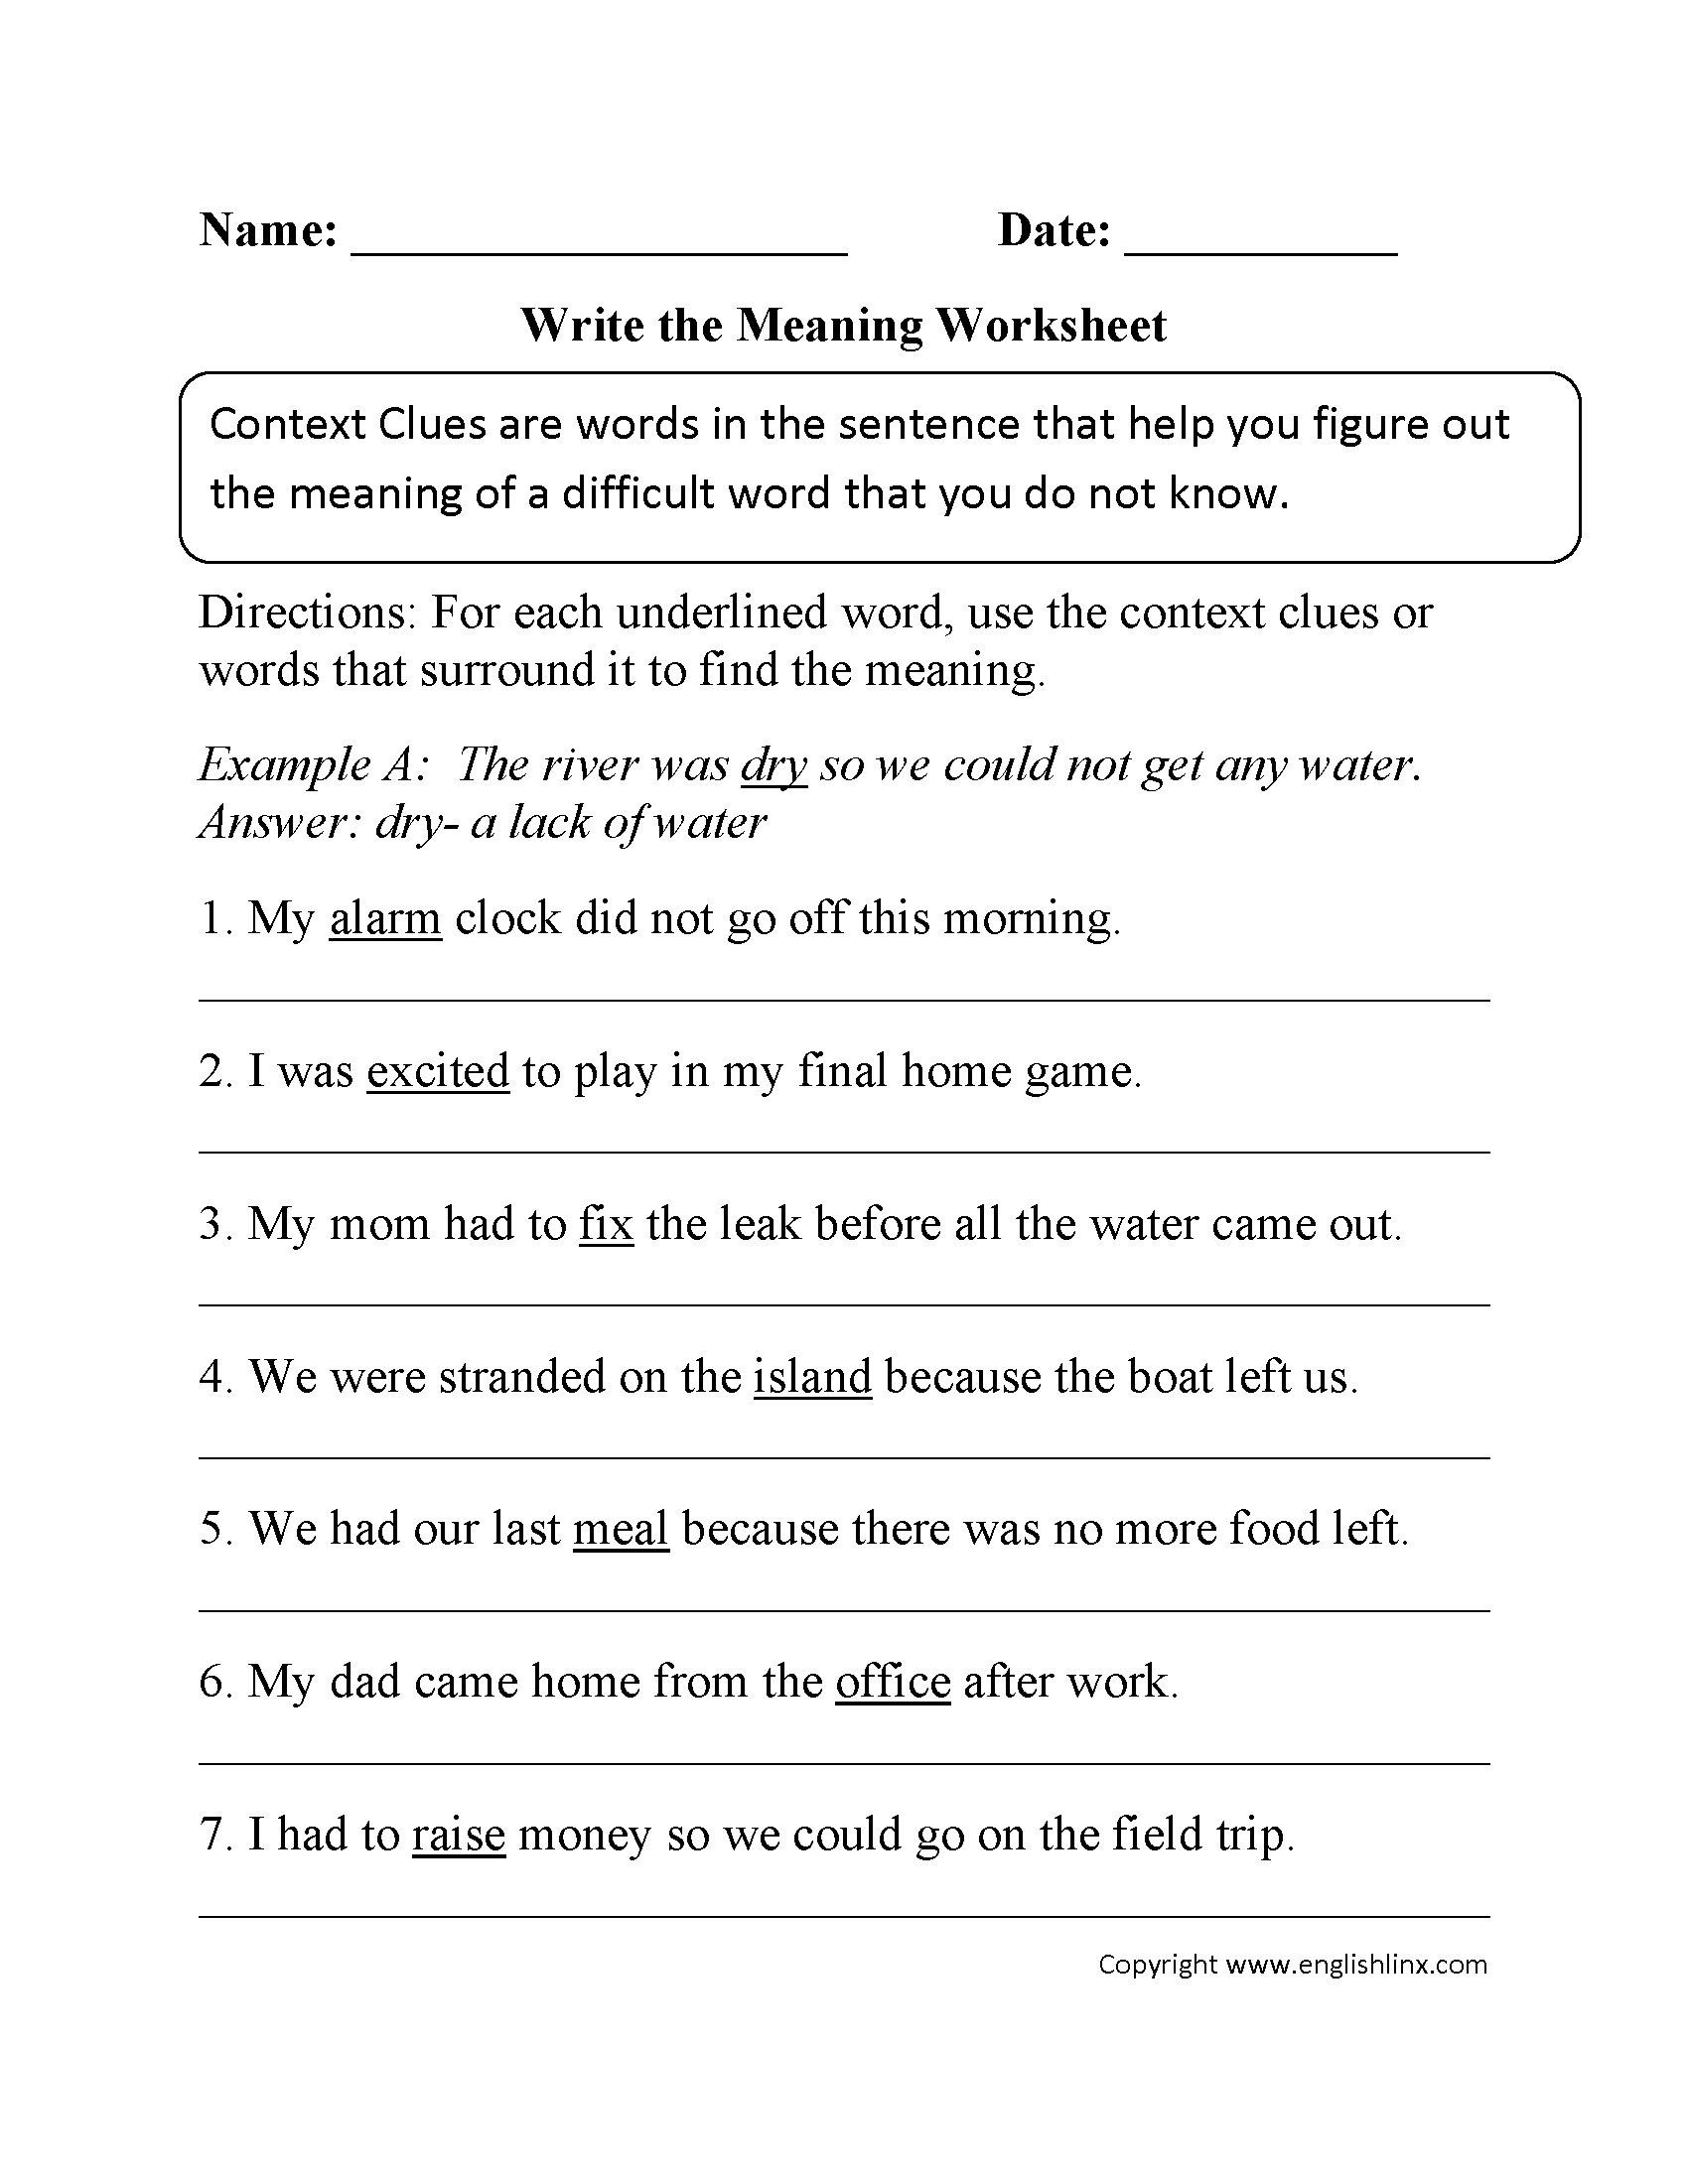 Write the Meaning Context Clues Worksheet